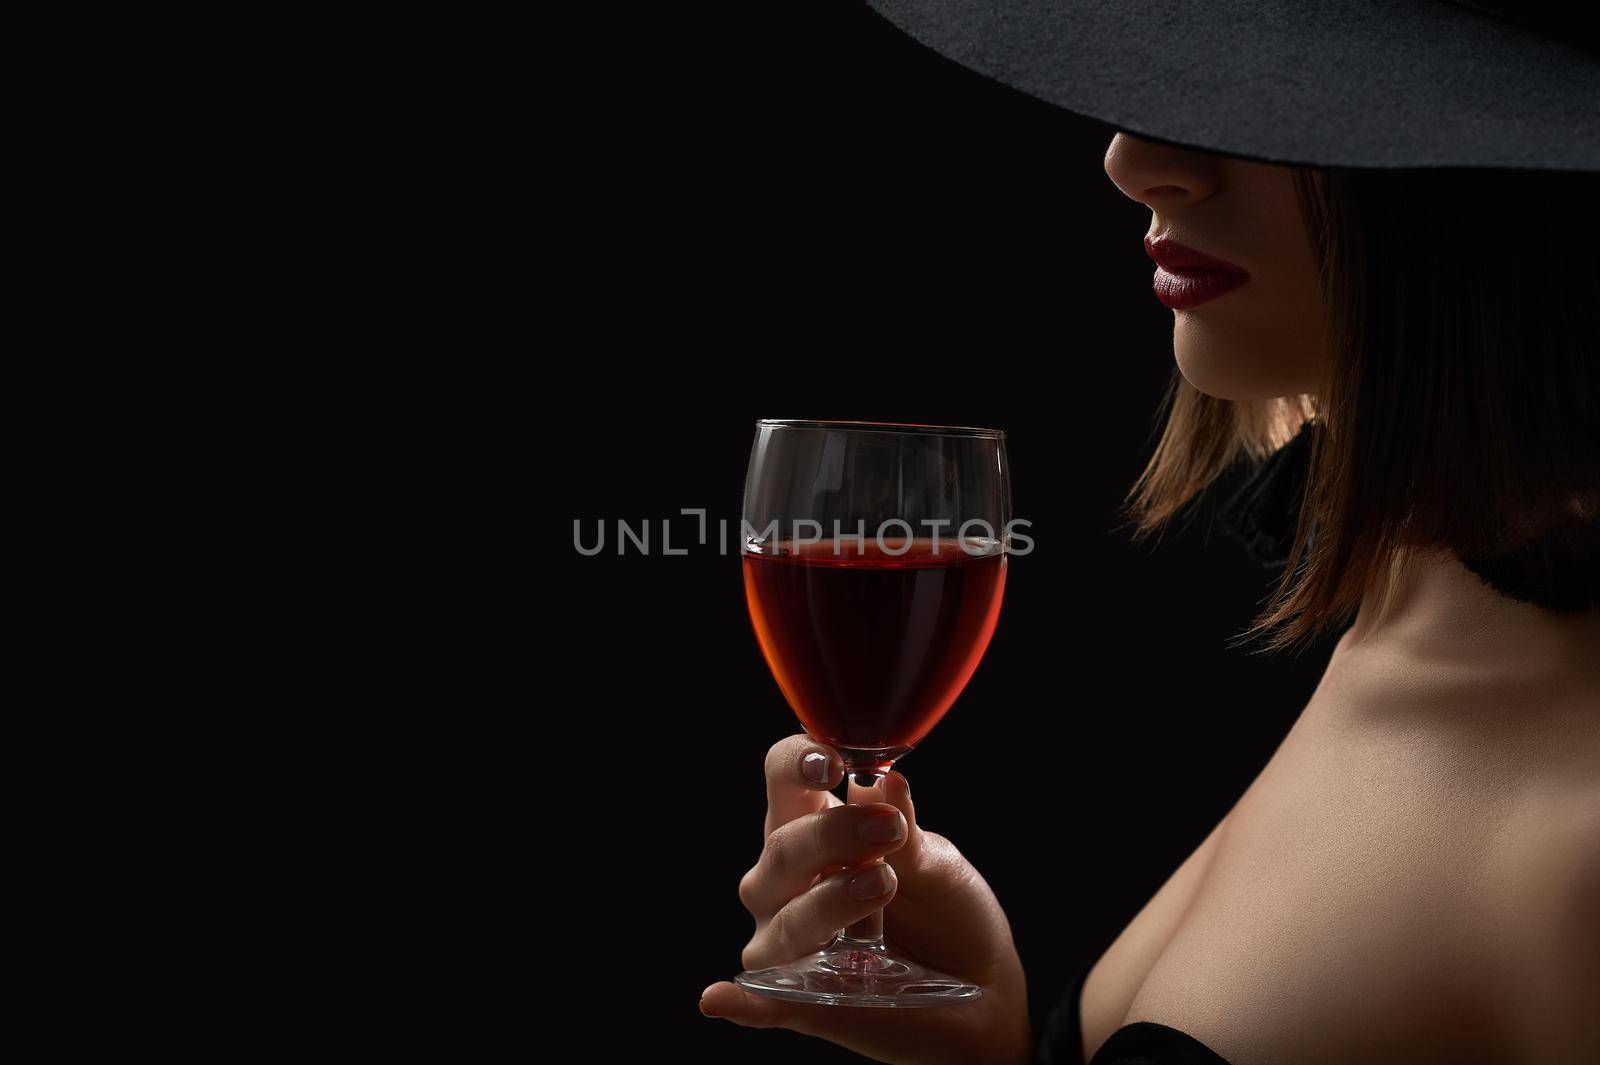 In love with wine. Cropped studio close up of a woman in a hat hiding her face holding a glass of red wine copyspace sexy hot lips seductive mysterious dark artistic shadow lighting